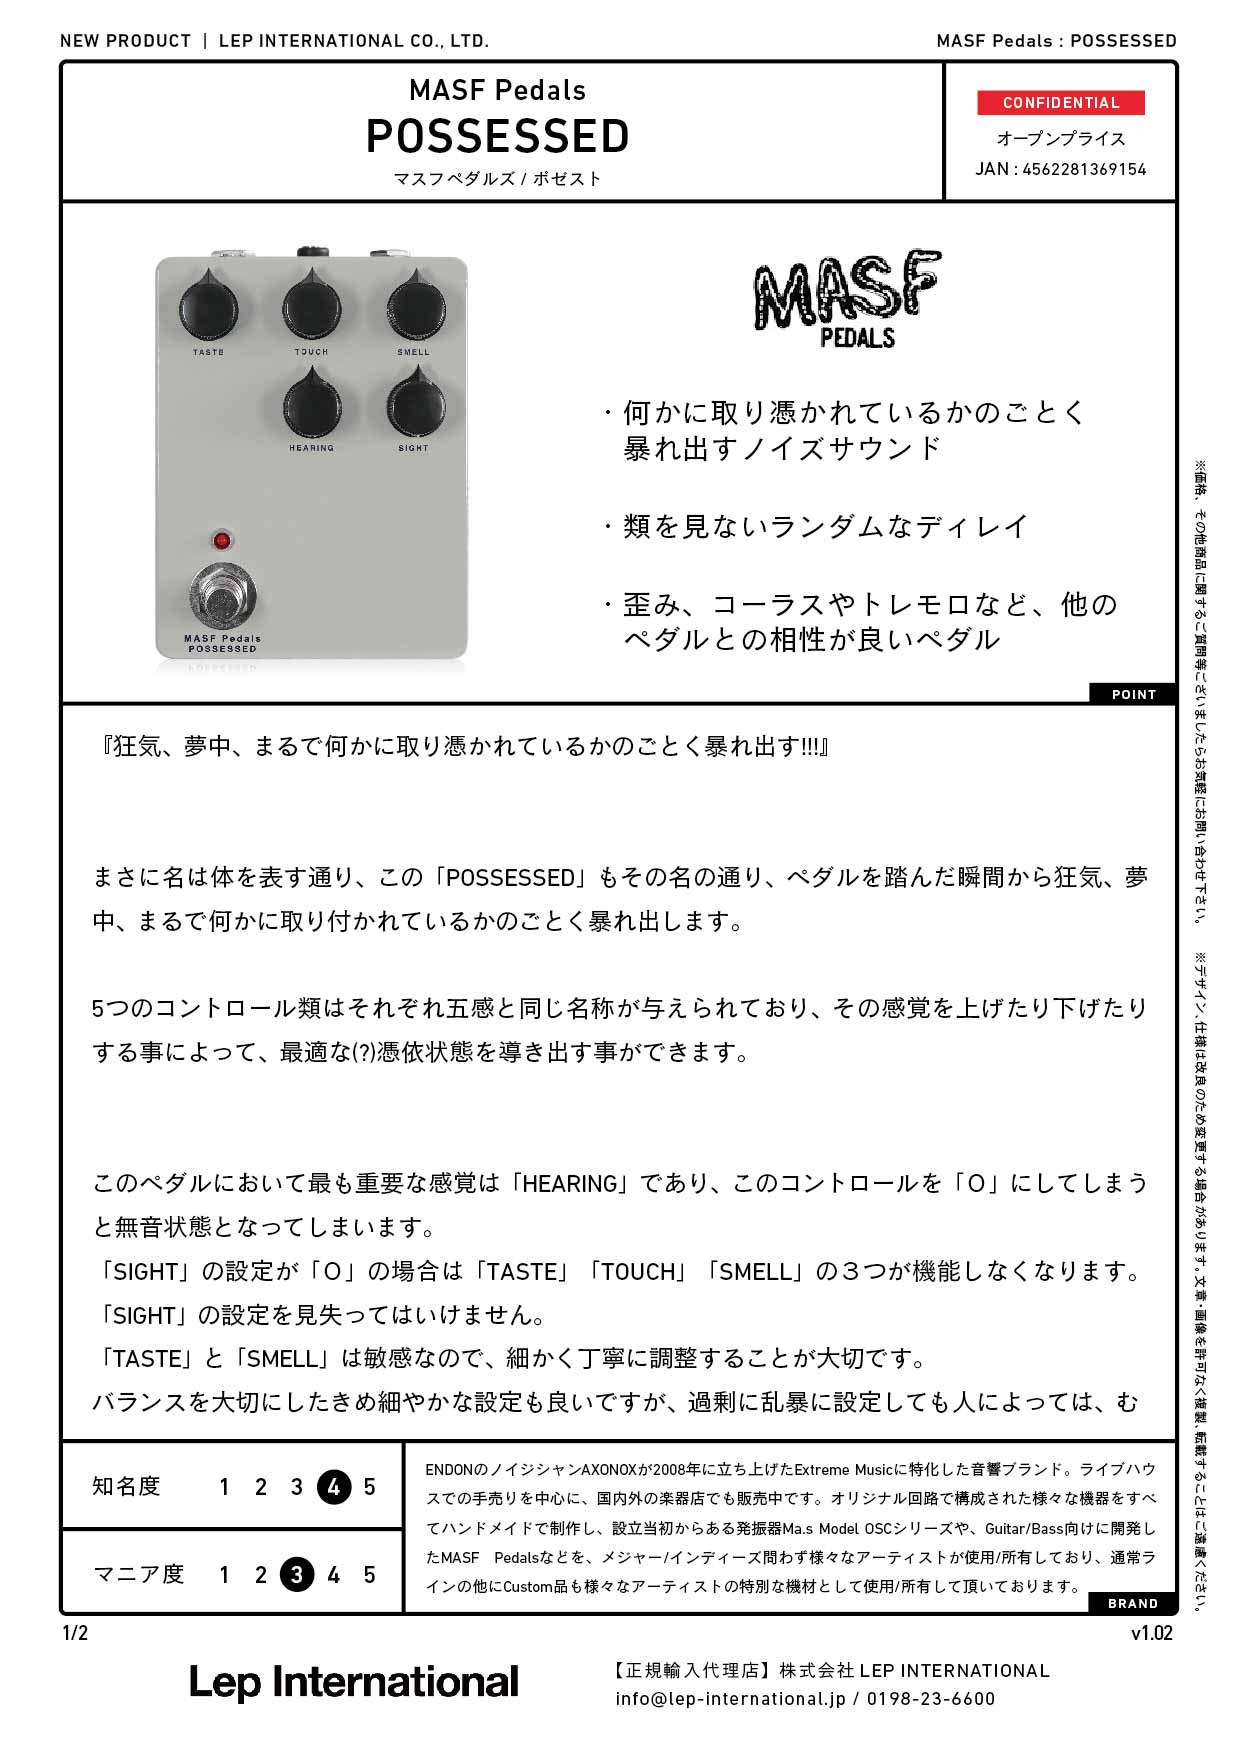 MASF Pedals/POSSESSED